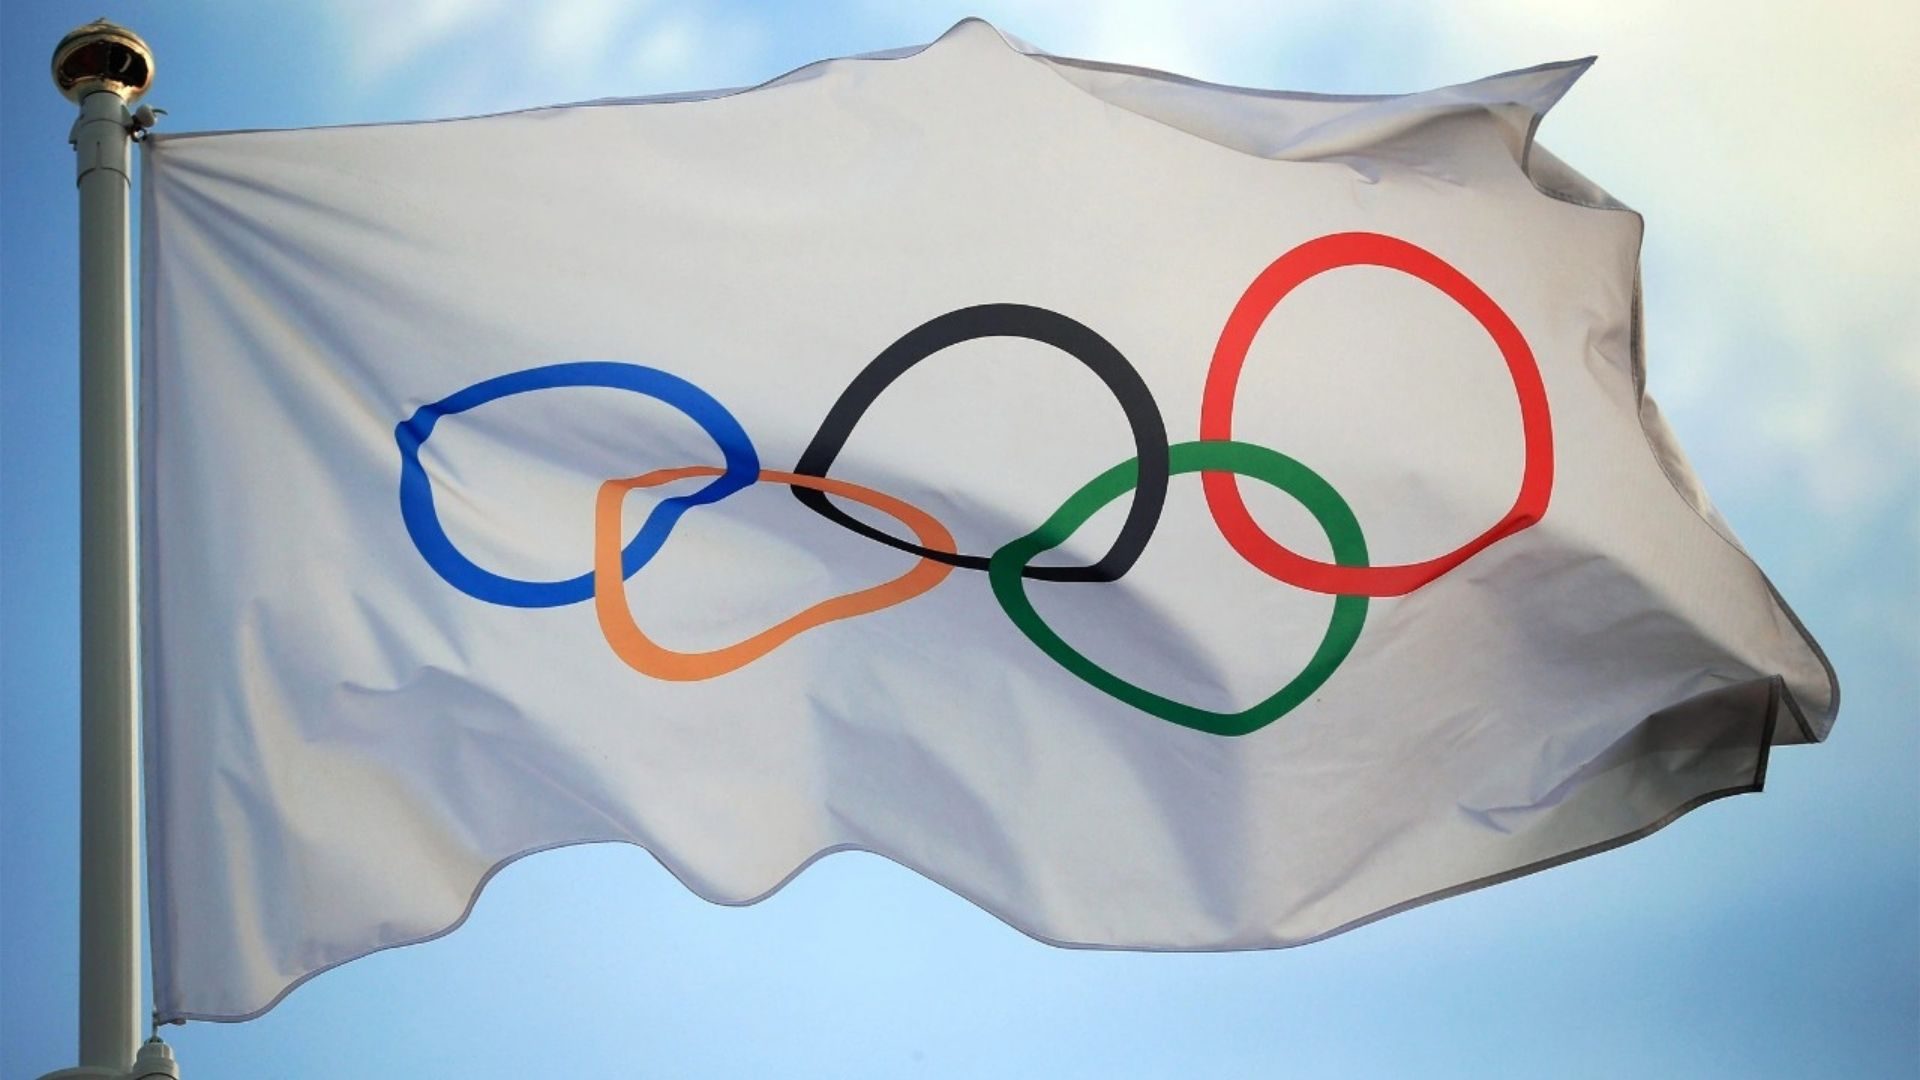 US faces immense pressure to stay away from the Beijing Winter Olympics on human rights grounds.